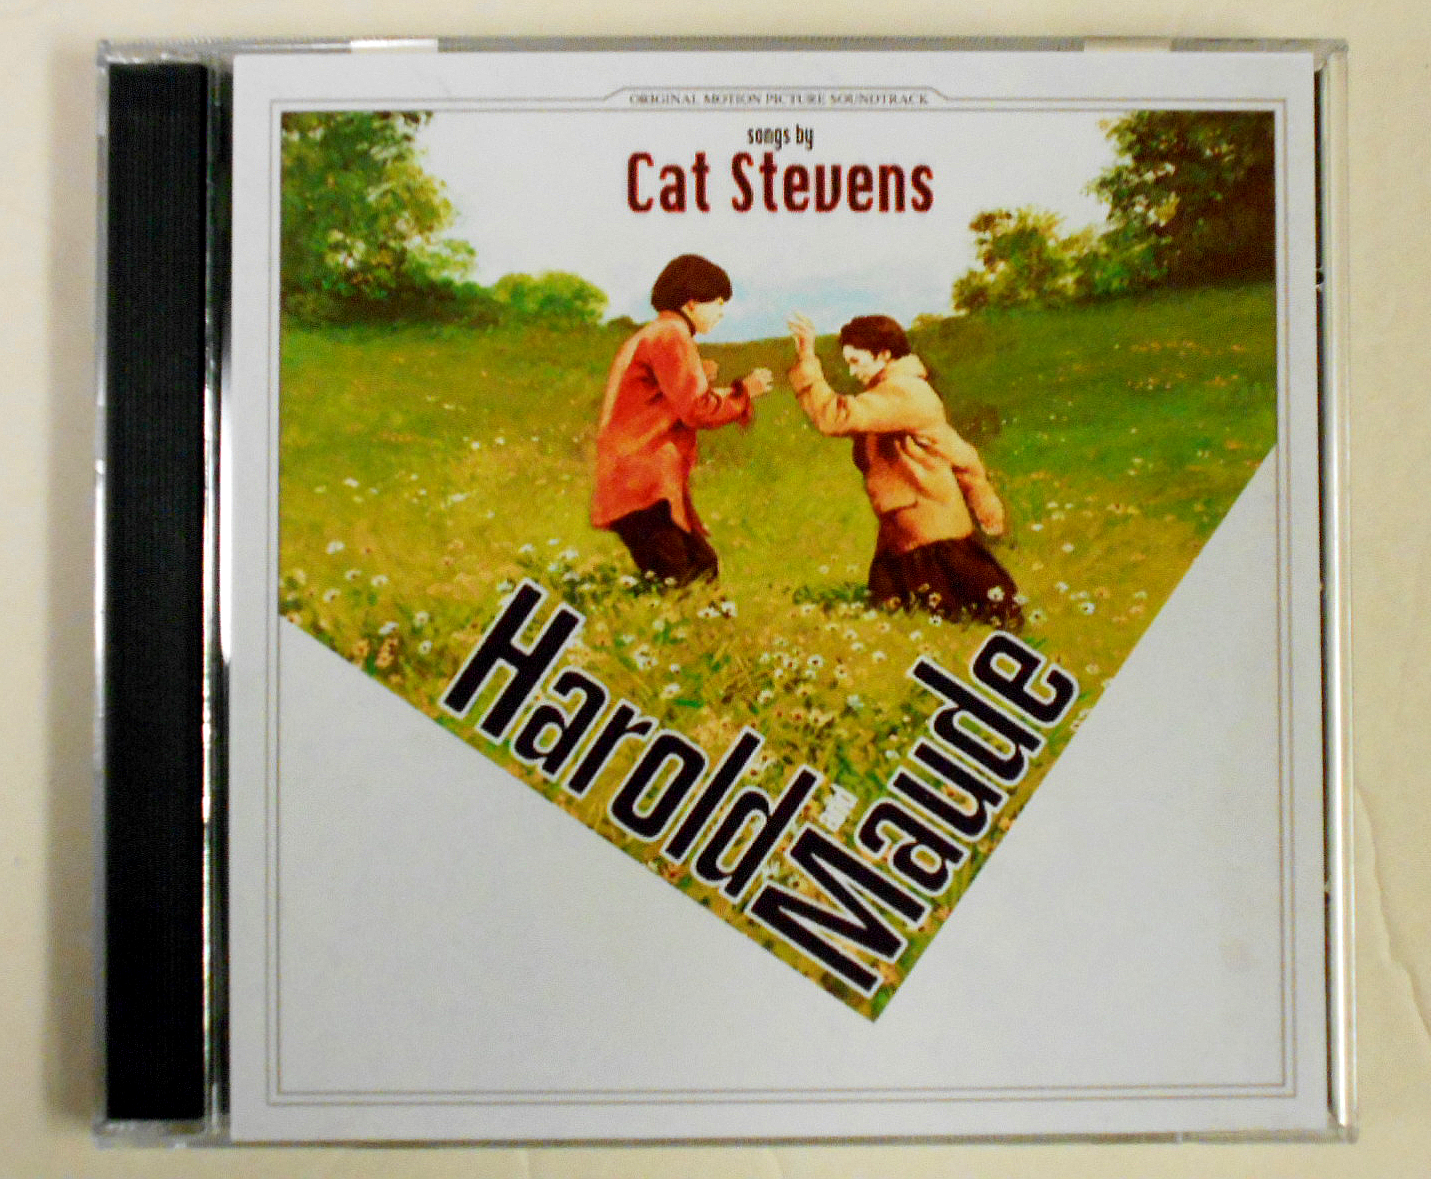 Harold   maude cd cover to post